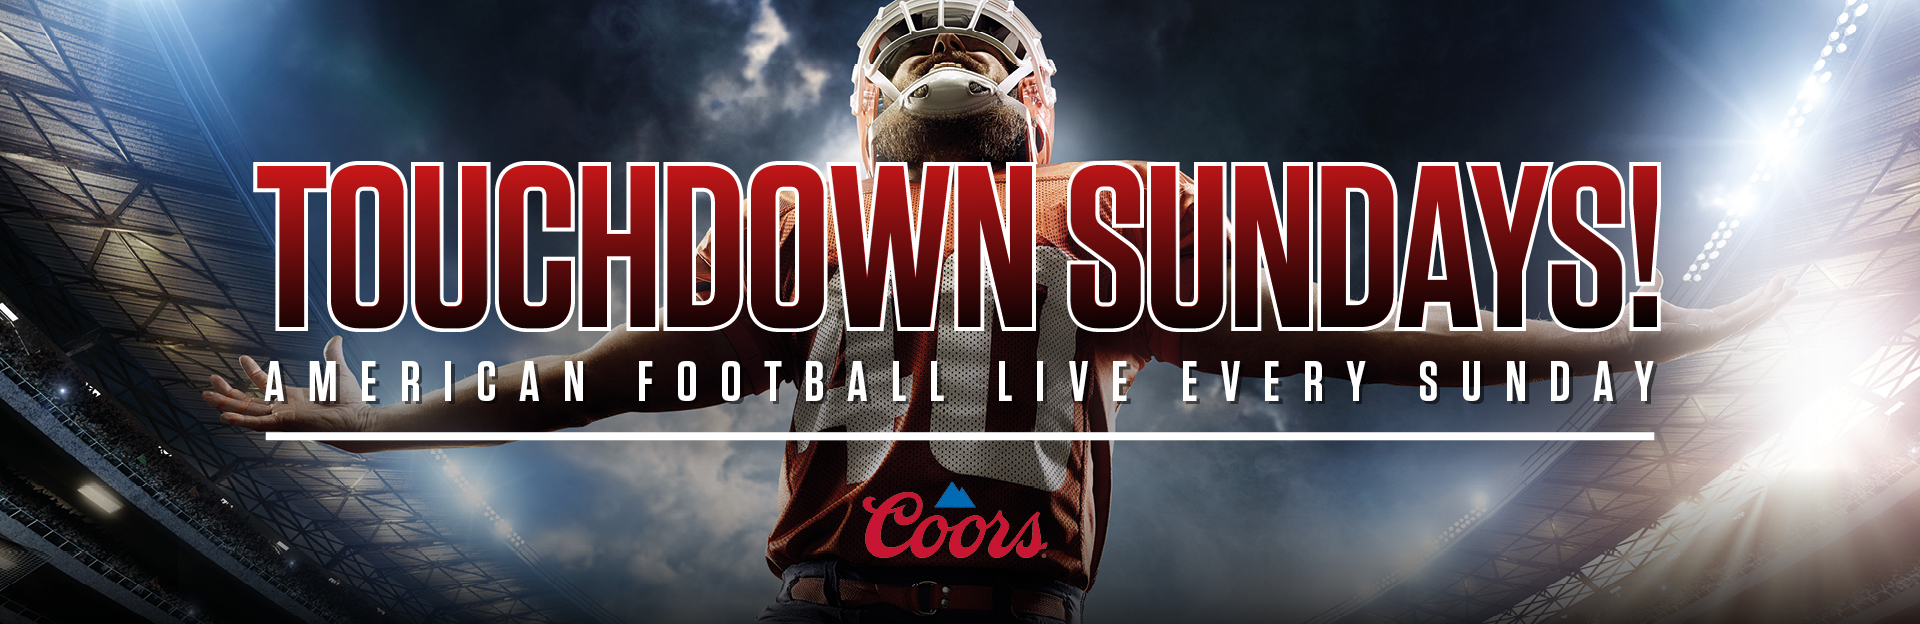 Watch NFL at The Piccadilly Tavern